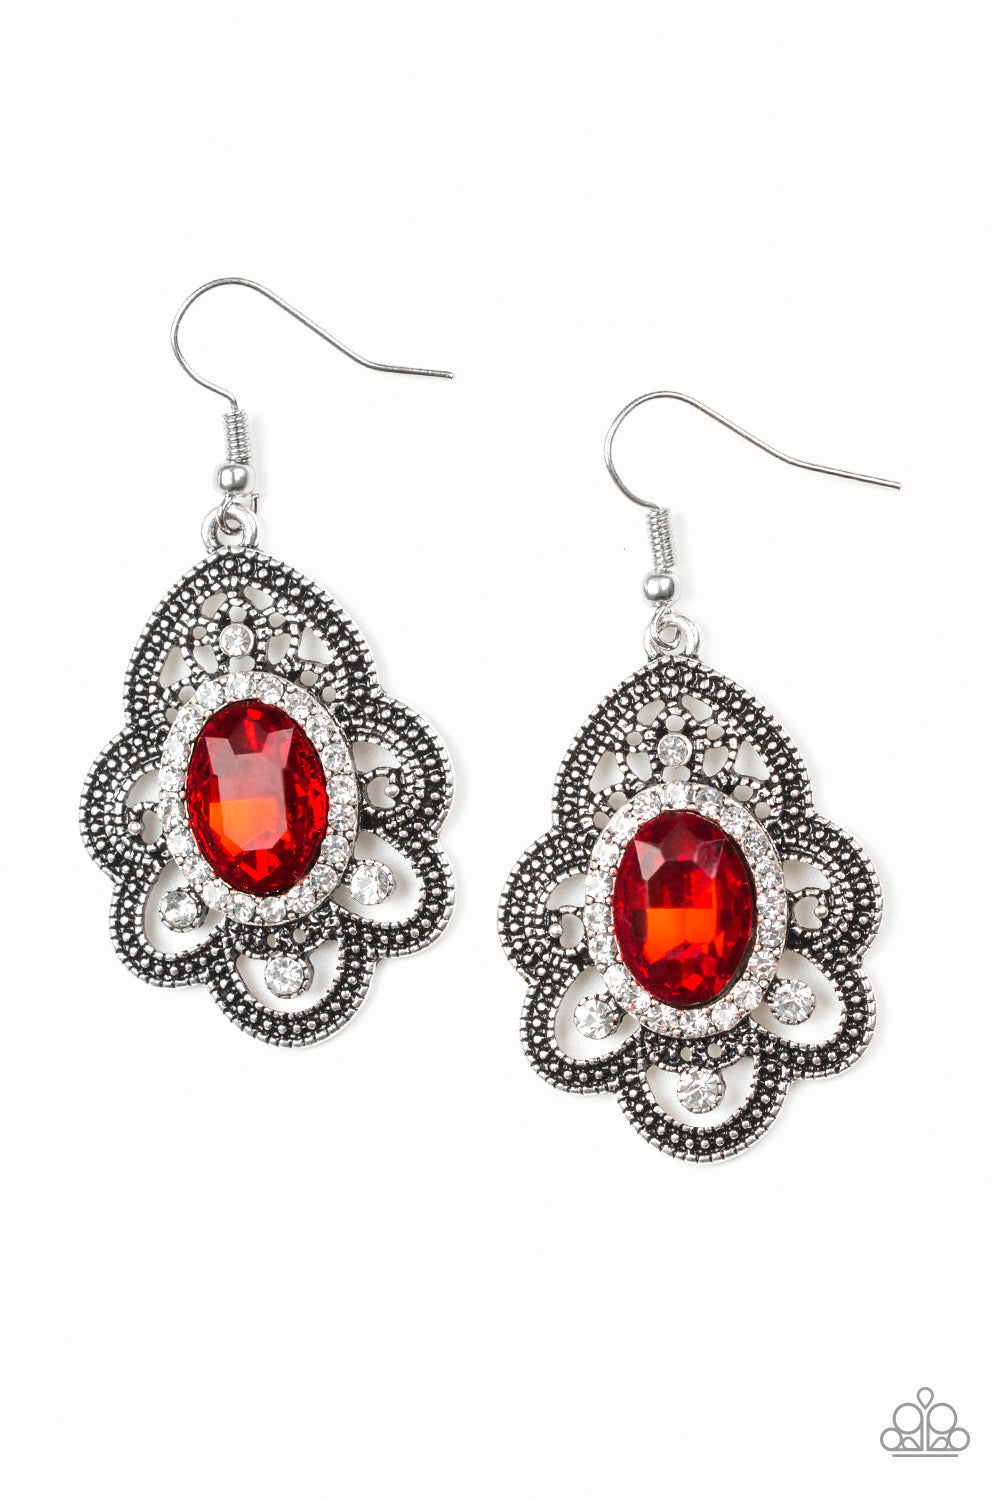 Paparazzi Reign Supreme - Red Earrings 